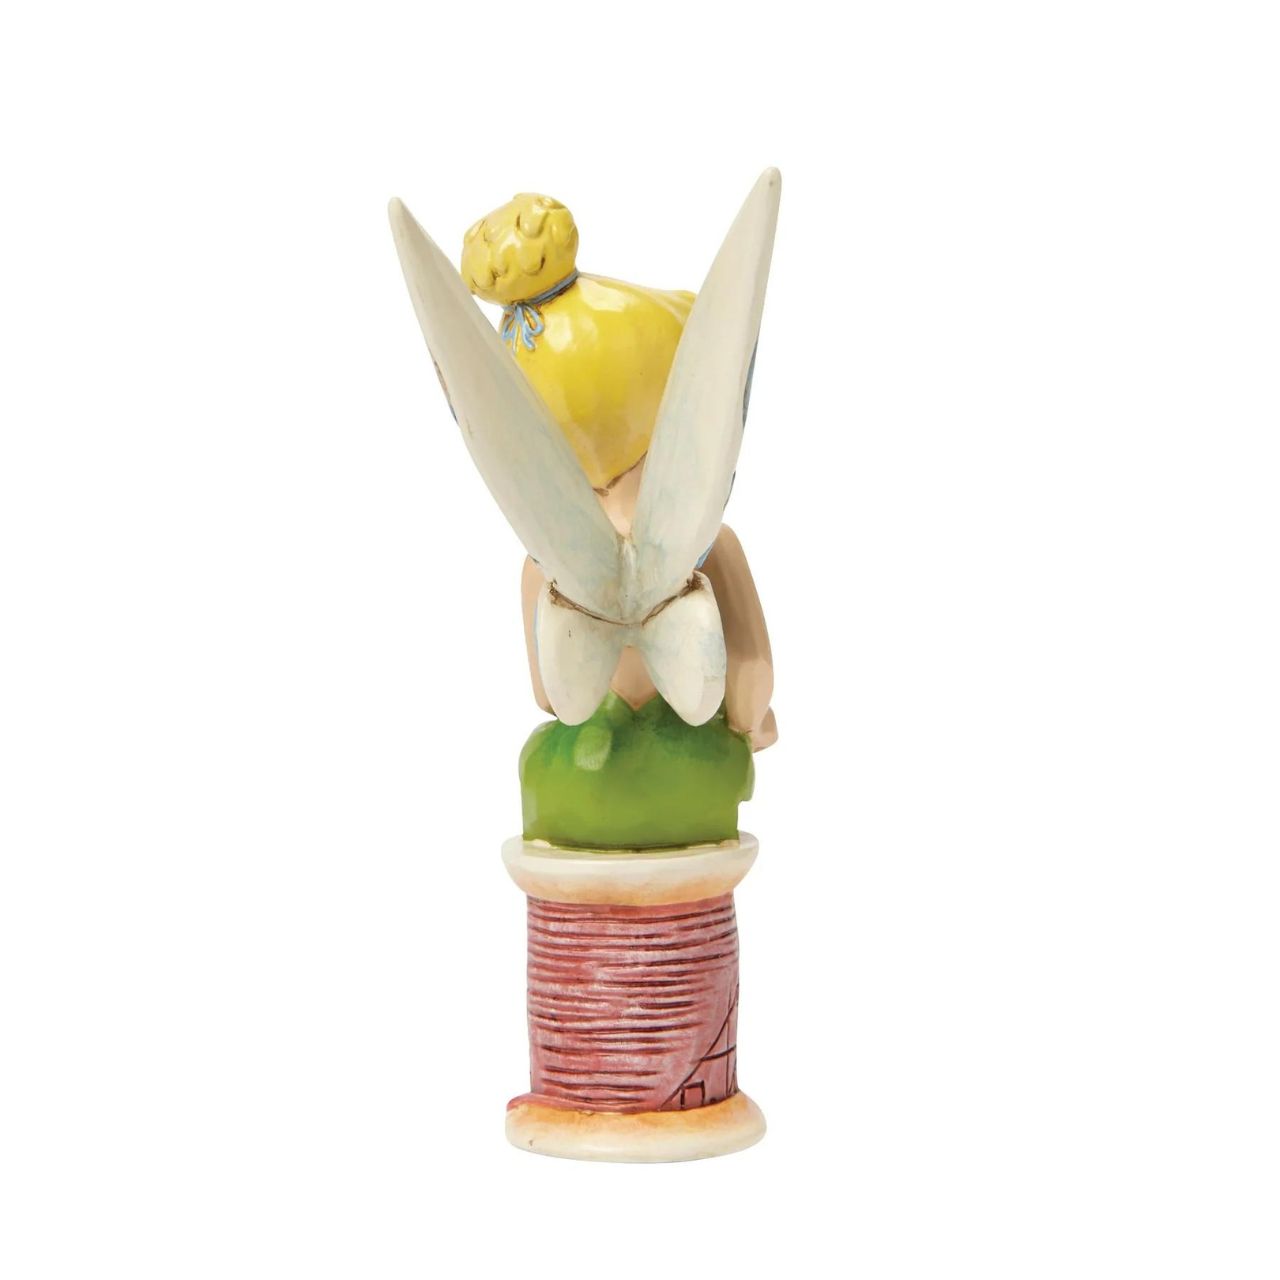 Disney Tinker Bell Crafty Tink Figurine  Tinker Bell takes a rest on a tiny spool of thread. Great for Tink lovers, Jim Shore collectors and sewing enthusiasts alike. A fun and flirty new personality pose from award winning artist and sculptor, Jim Shore.